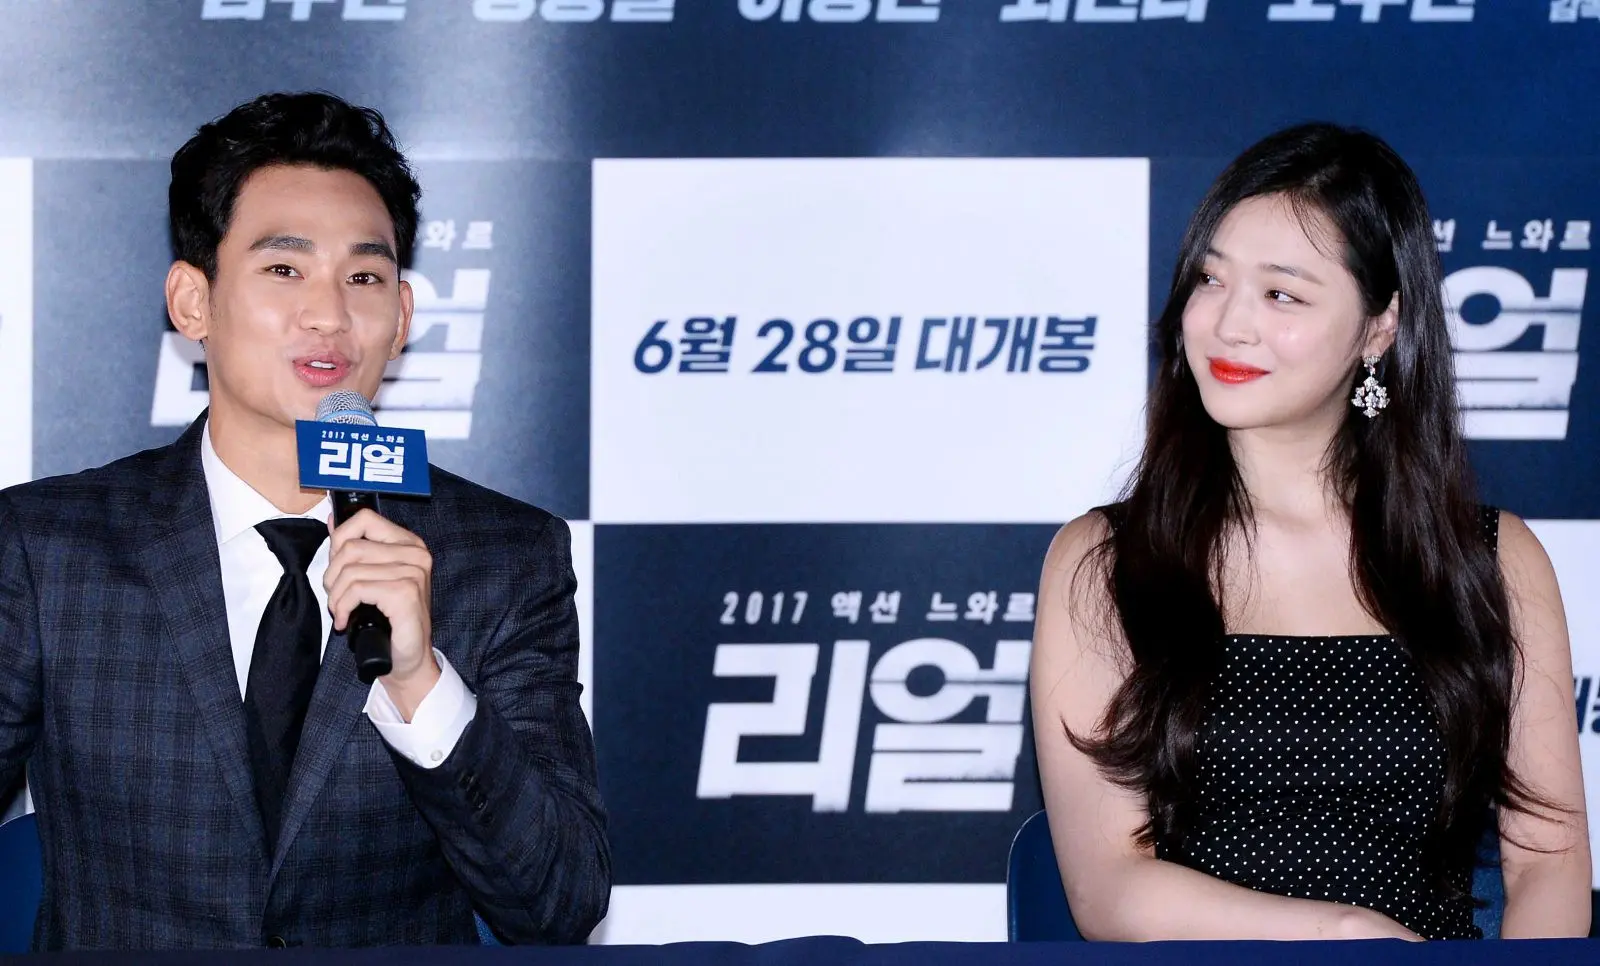 charles giglio recommends kim soo hyun sex pic